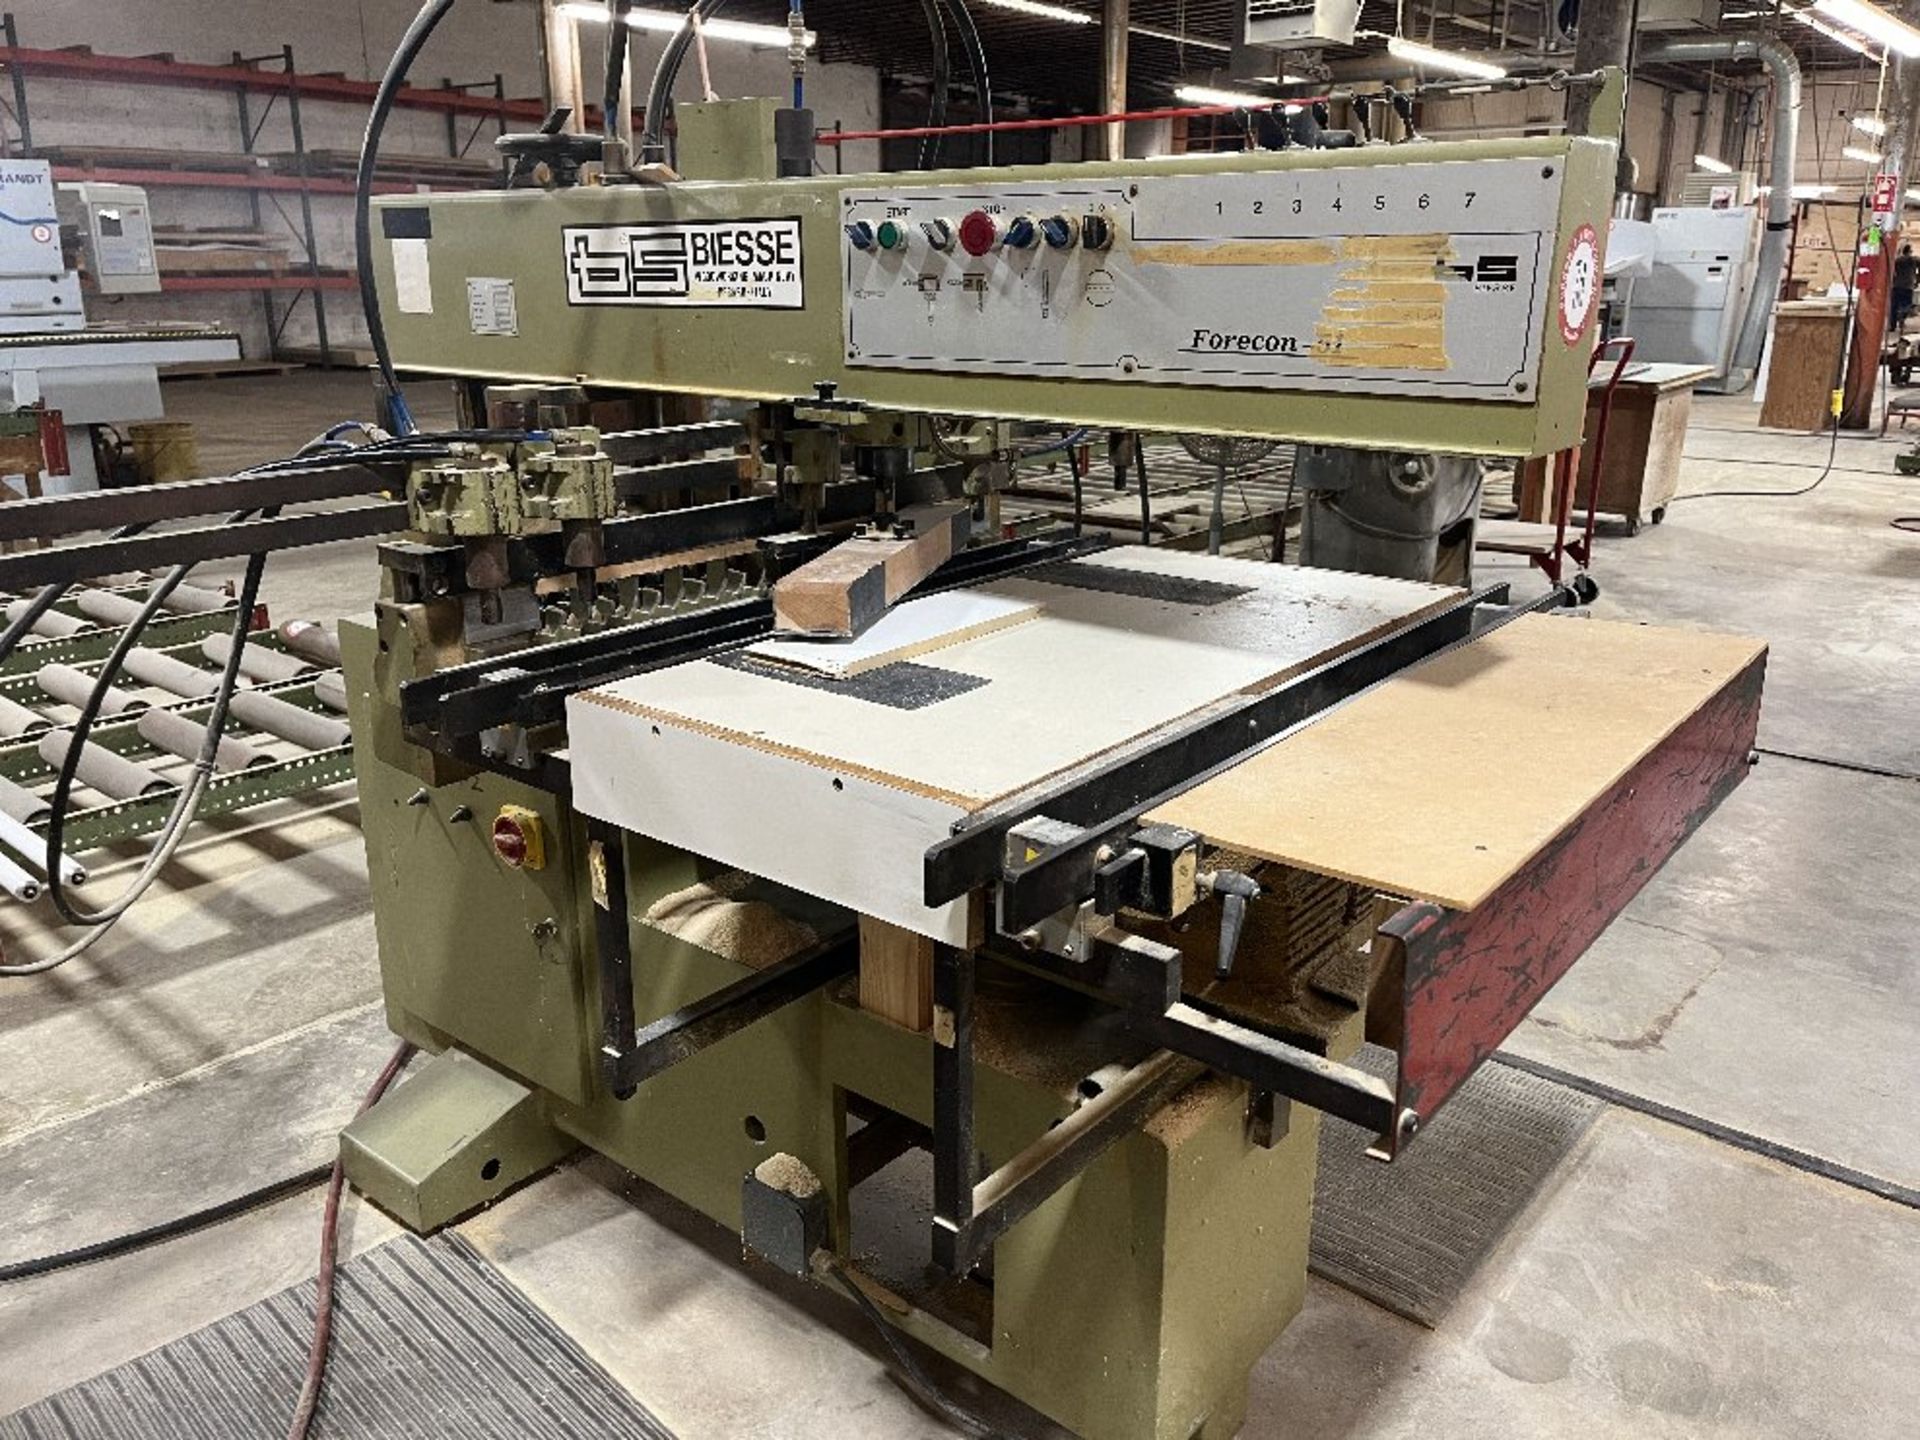 B. A. Biesse Multi Spindle Boring Machine, Model Forecon 51, Series 360/84, 5 Heads, Model Year